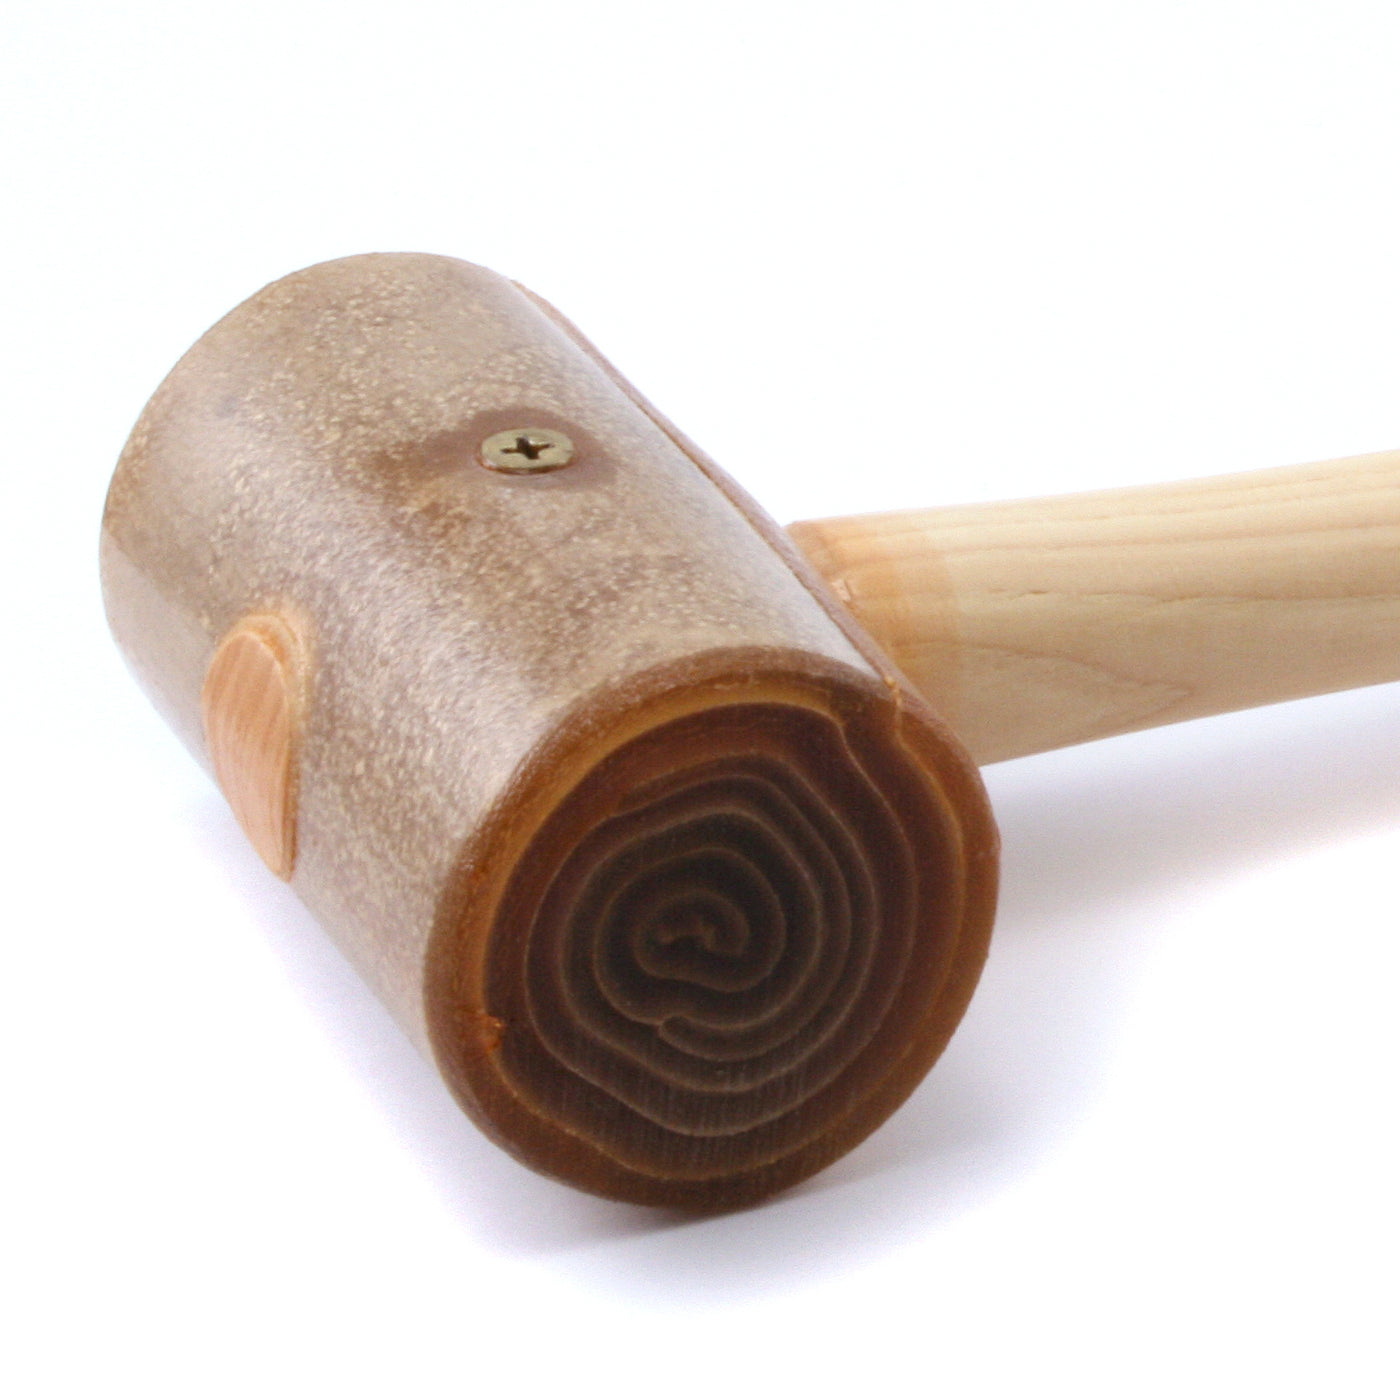 Premium Rawhide Mallet Hammer for Jewelry or Metal 9 oz. - Hammers